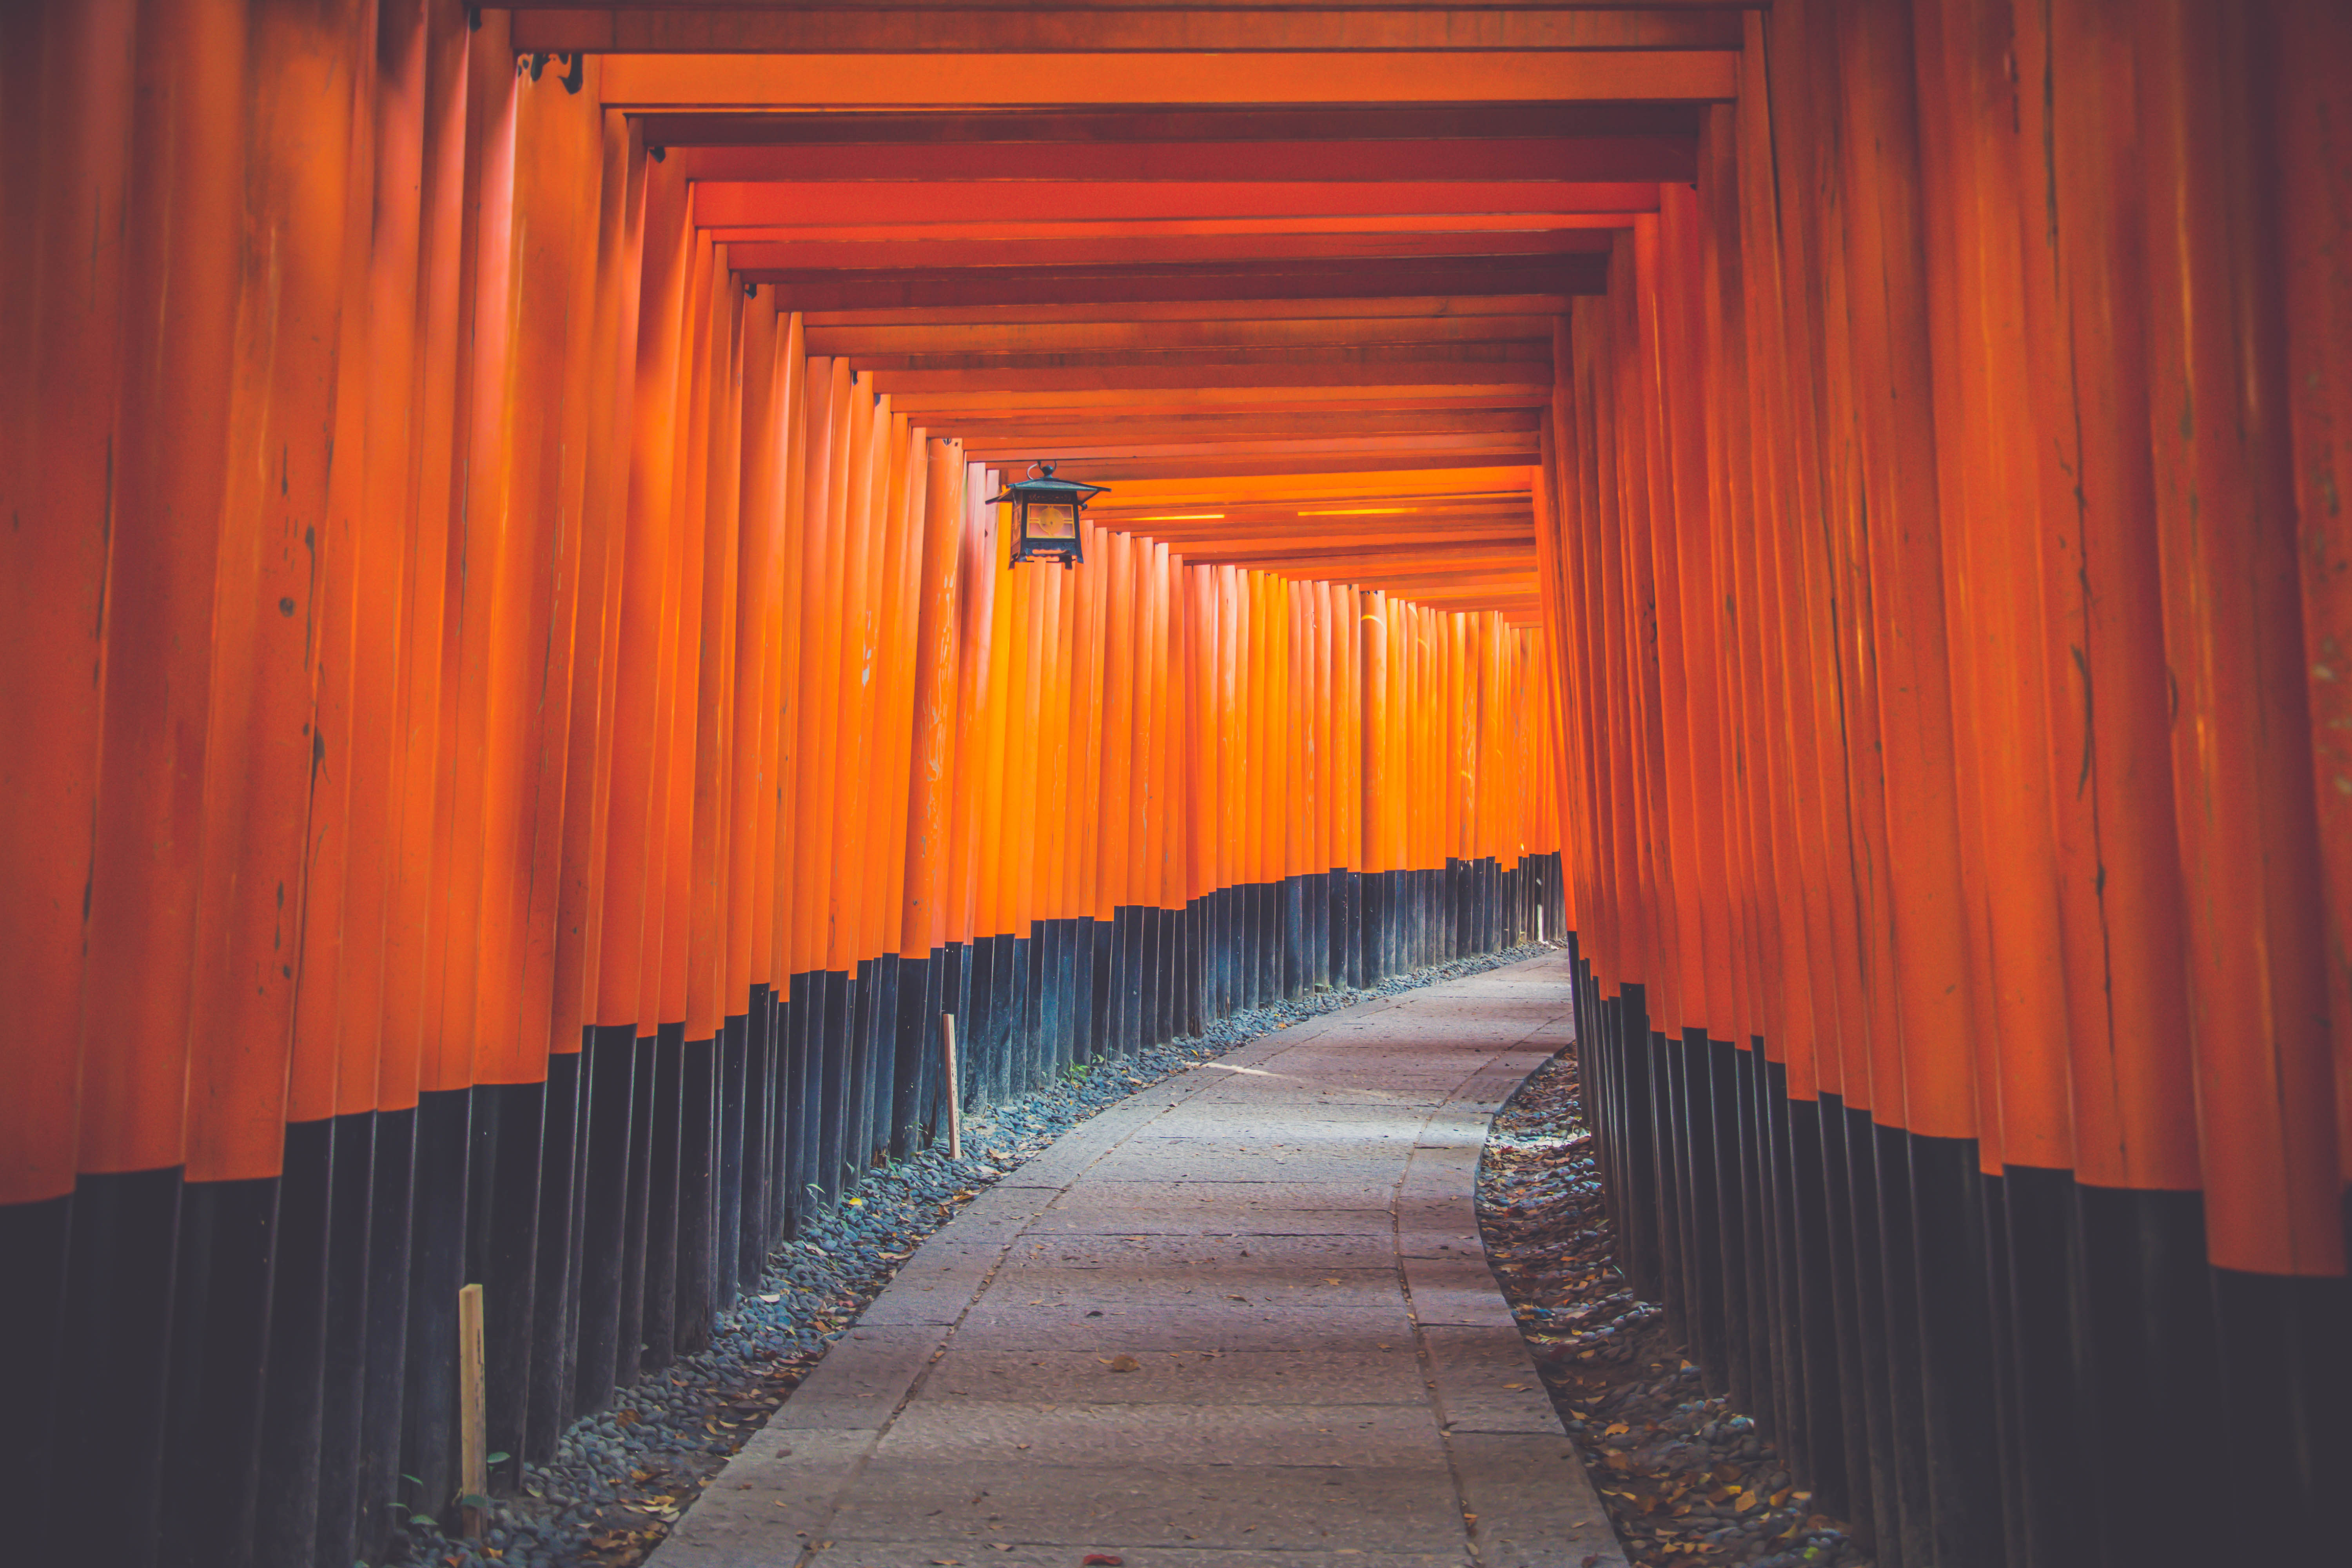 hallway, Blue, Orange, Wall, Architecture, Bright, Asian architecture, Japan, Outdoors, Path, Pathway Wallpaper